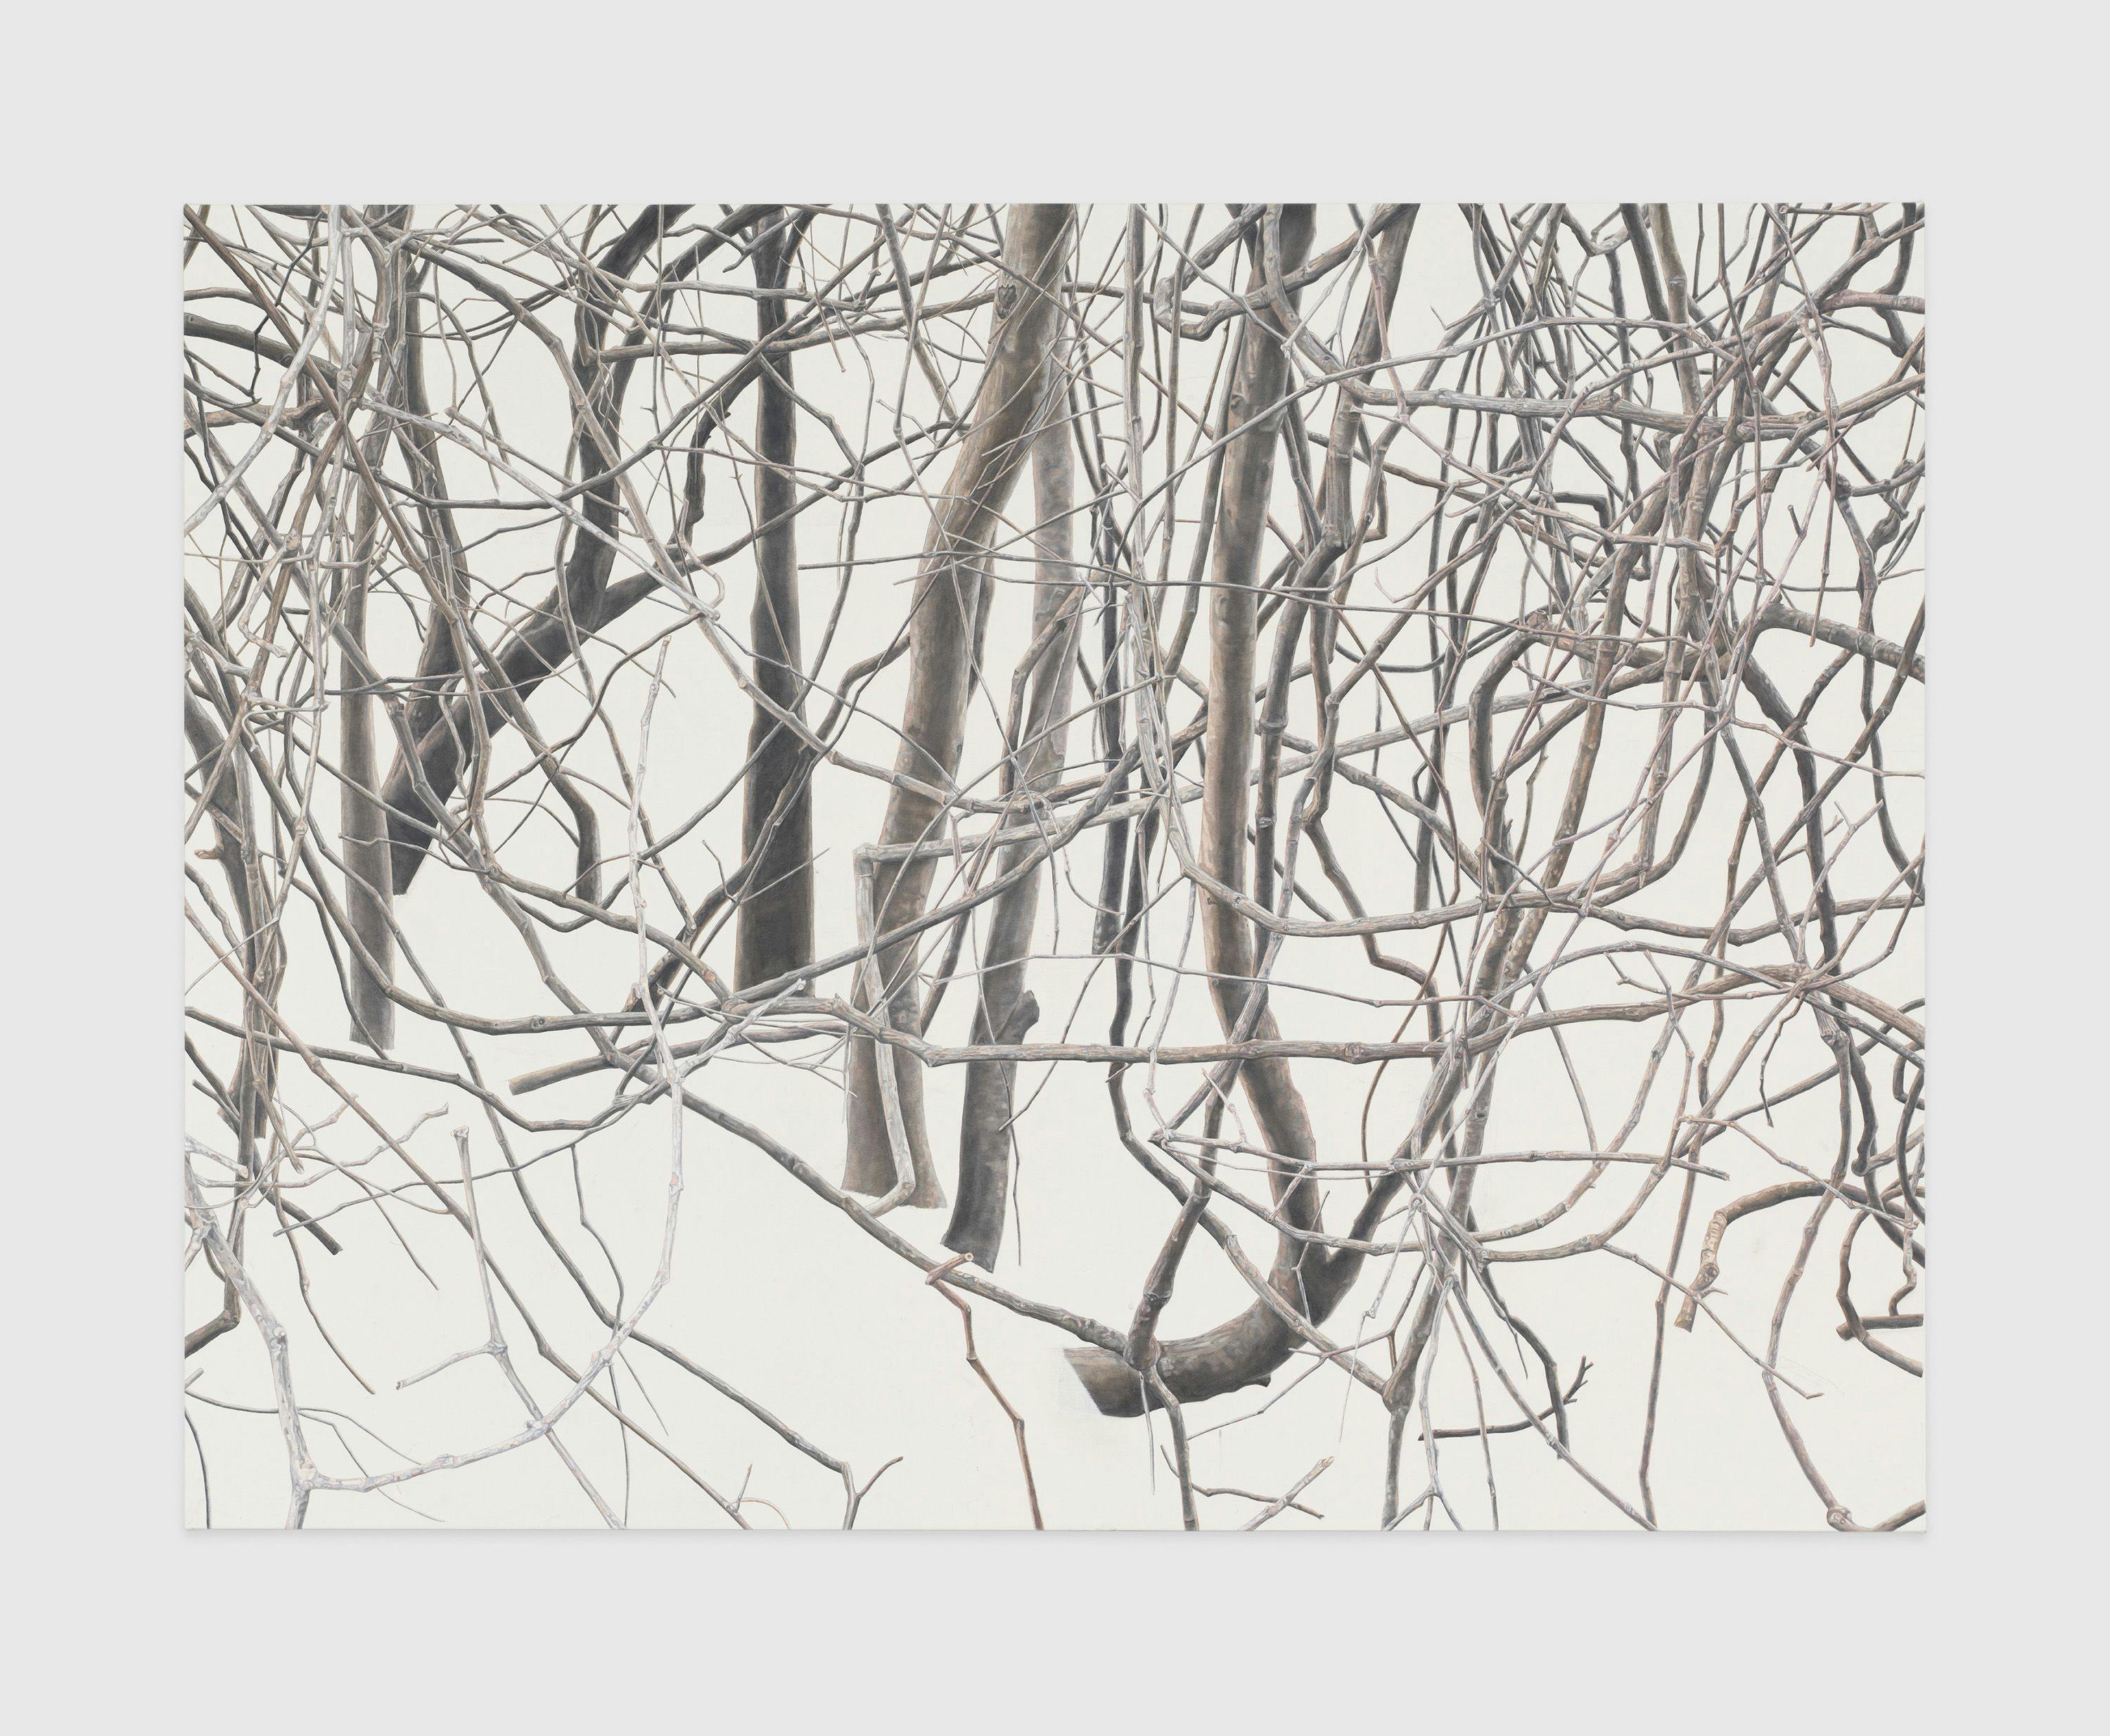 A painting by Toba Khedoori, called Untitled (branches 1), 2011 to 2012.